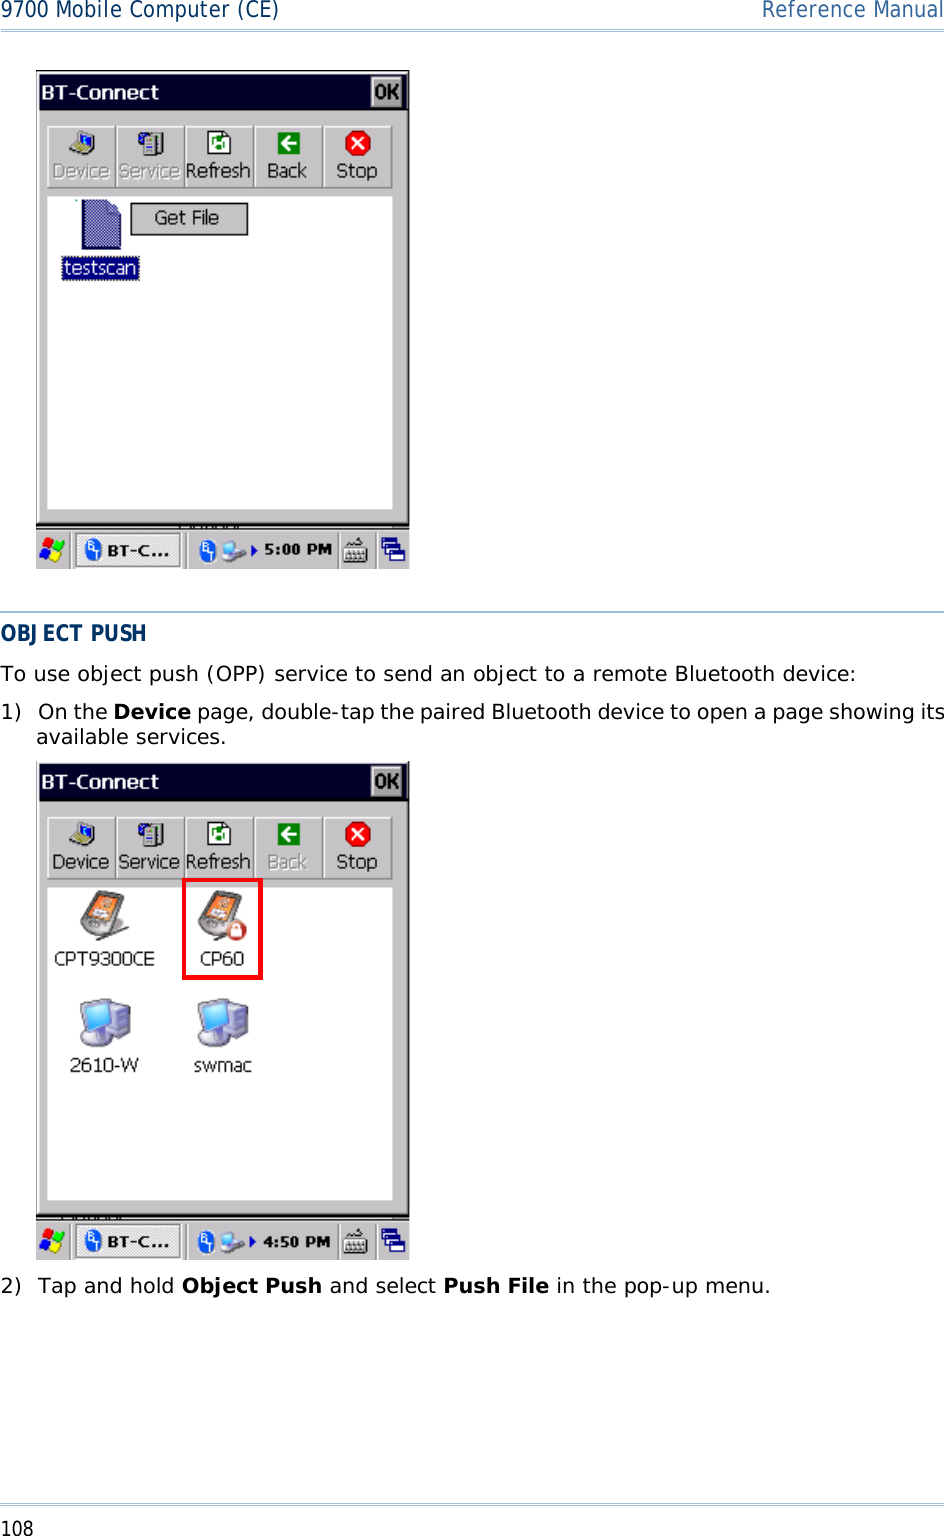 1089700 Mobile Computer (CE)  Reference ManualOBJECT PUSH To use object push (OPP) service to send an object to a remote Bluetooth device: 1) On the Device page, double-tap the paired Bluetooth device to open a page showing its available services. 2) Tap and hold Object Push and select Push File in the pop-up menu. 